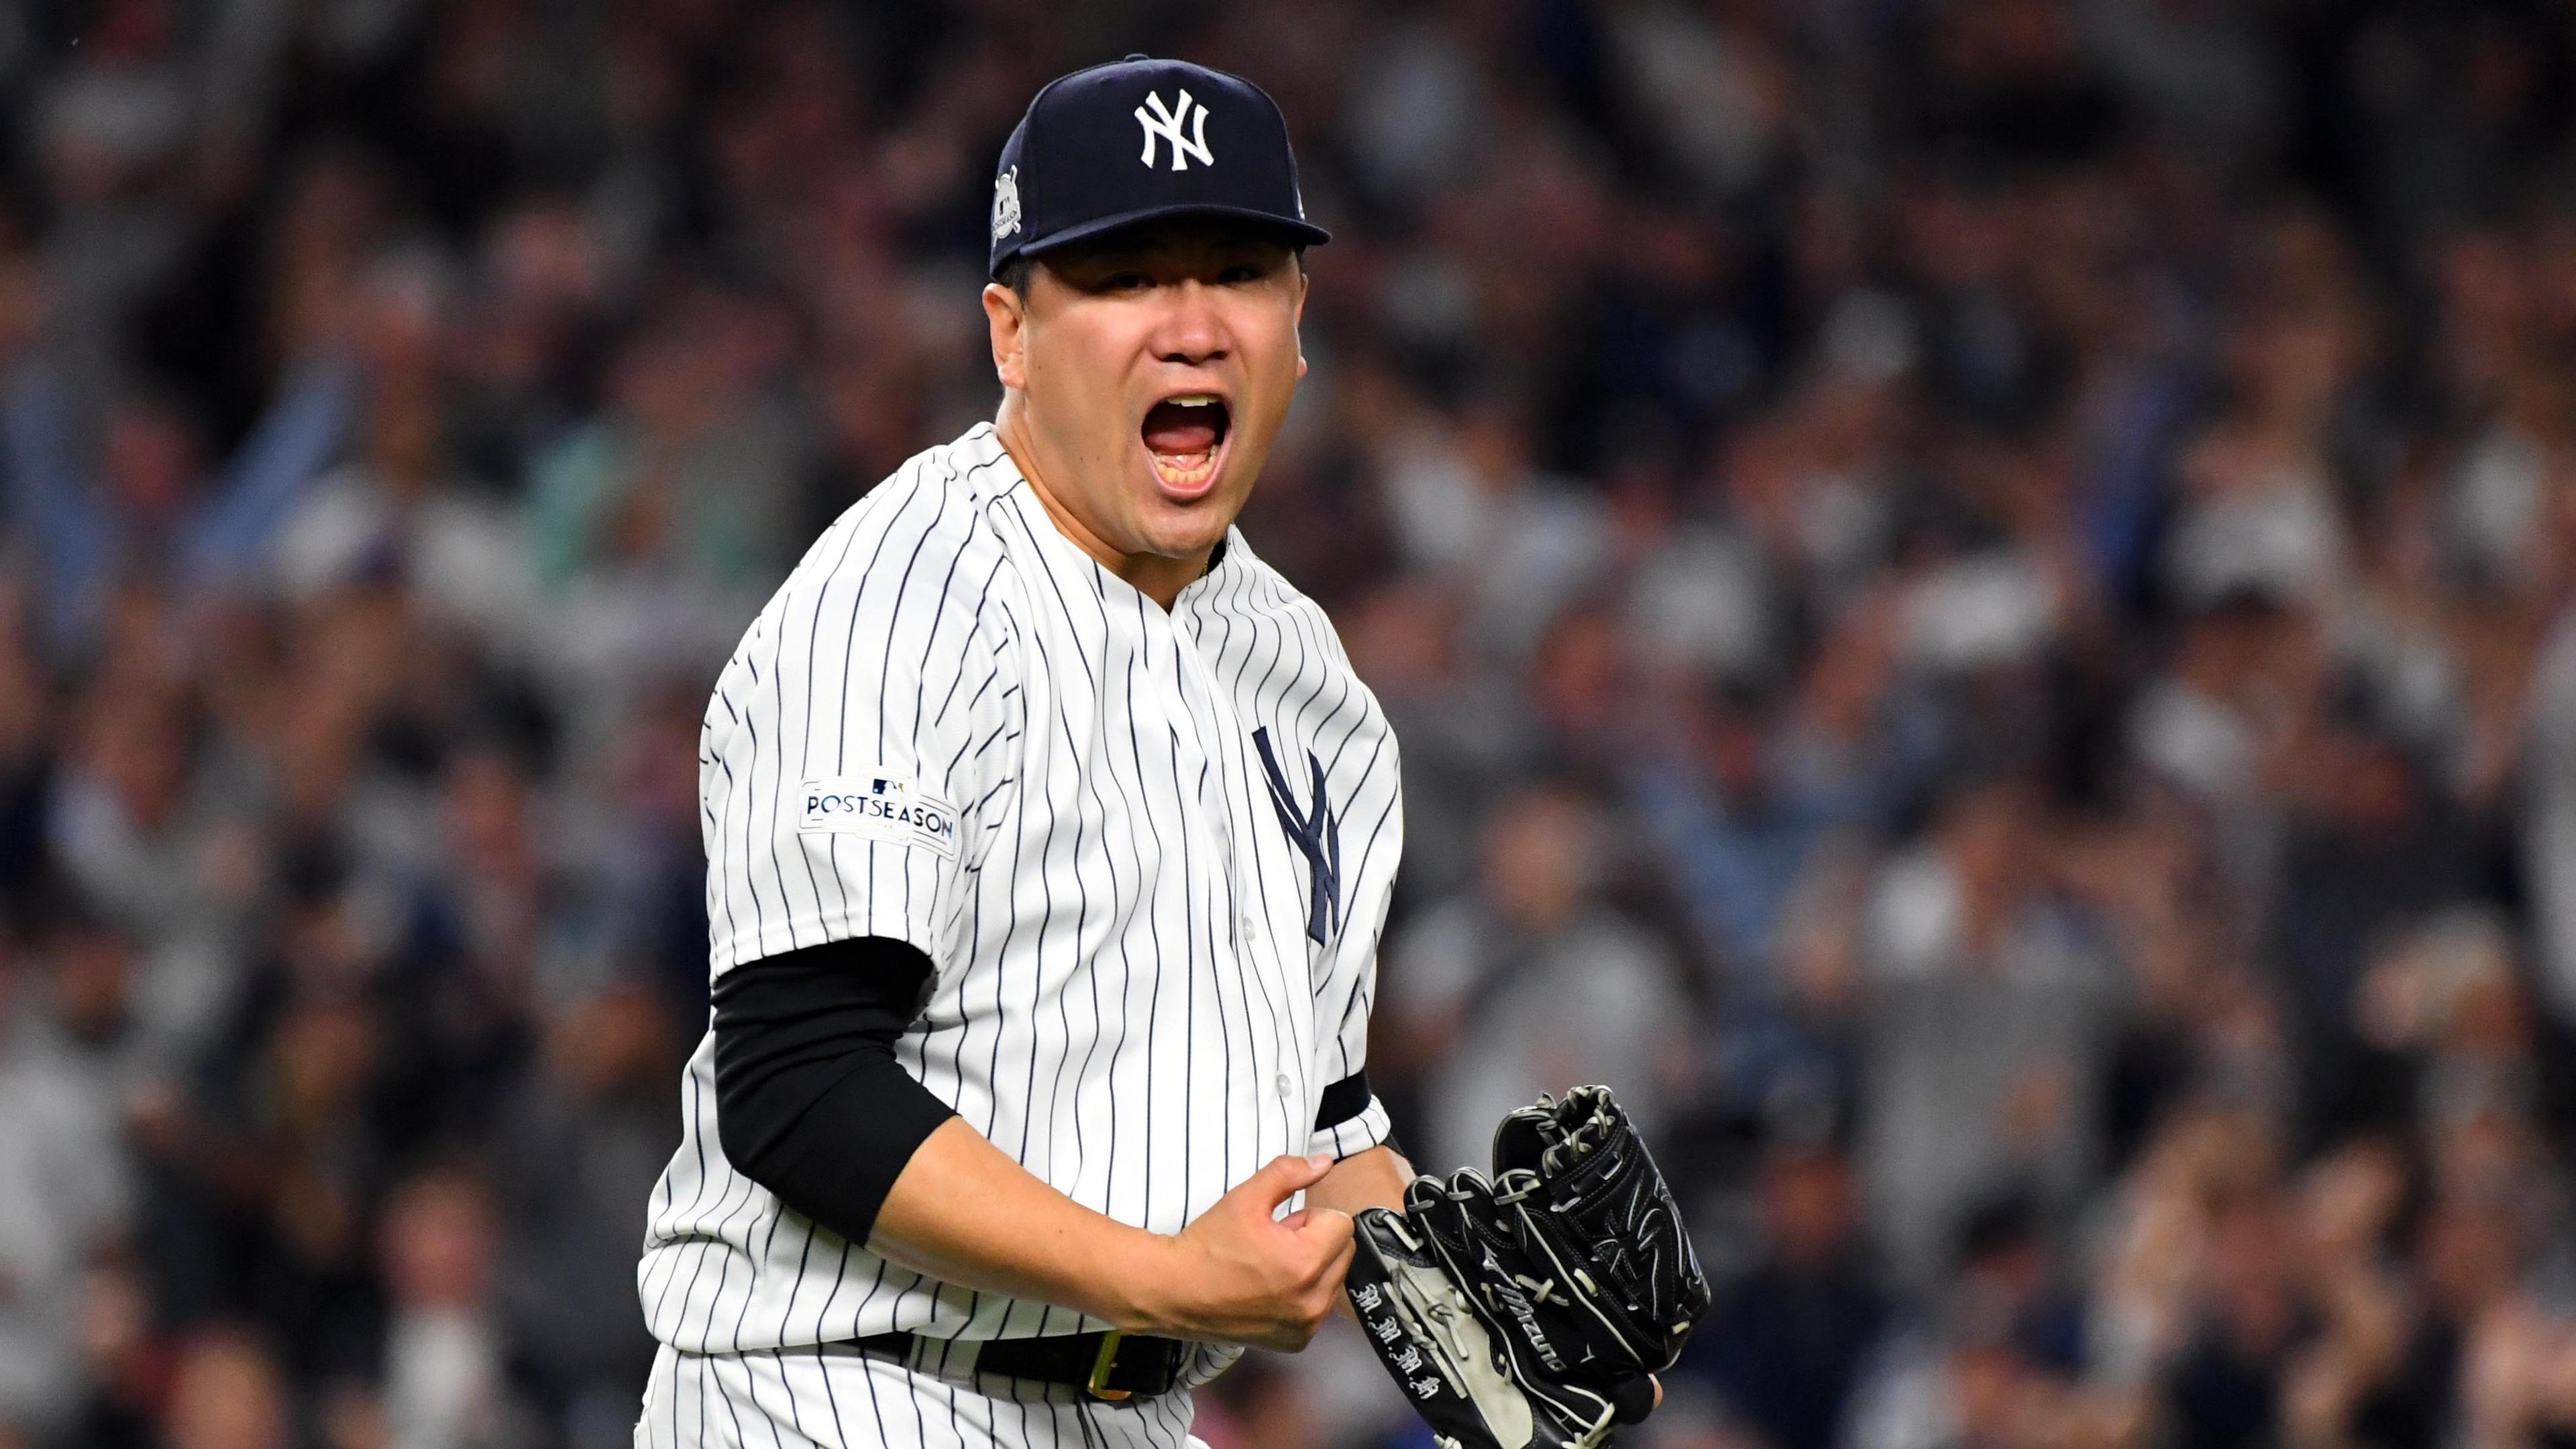 Oct 18, 2017; Bronx, NY, USA; New York Yankees starting pitcher Masahiro Tanaka (19) reacts after pitching during the fifth inning against the Houston Astros in game five of the 2017 ALCS playoff baseball series at Yankee Stadium. Mandatory Credit: Robert Deutsch-USA TODAY Sports / Robert Deutsch-USA TODAY Sports